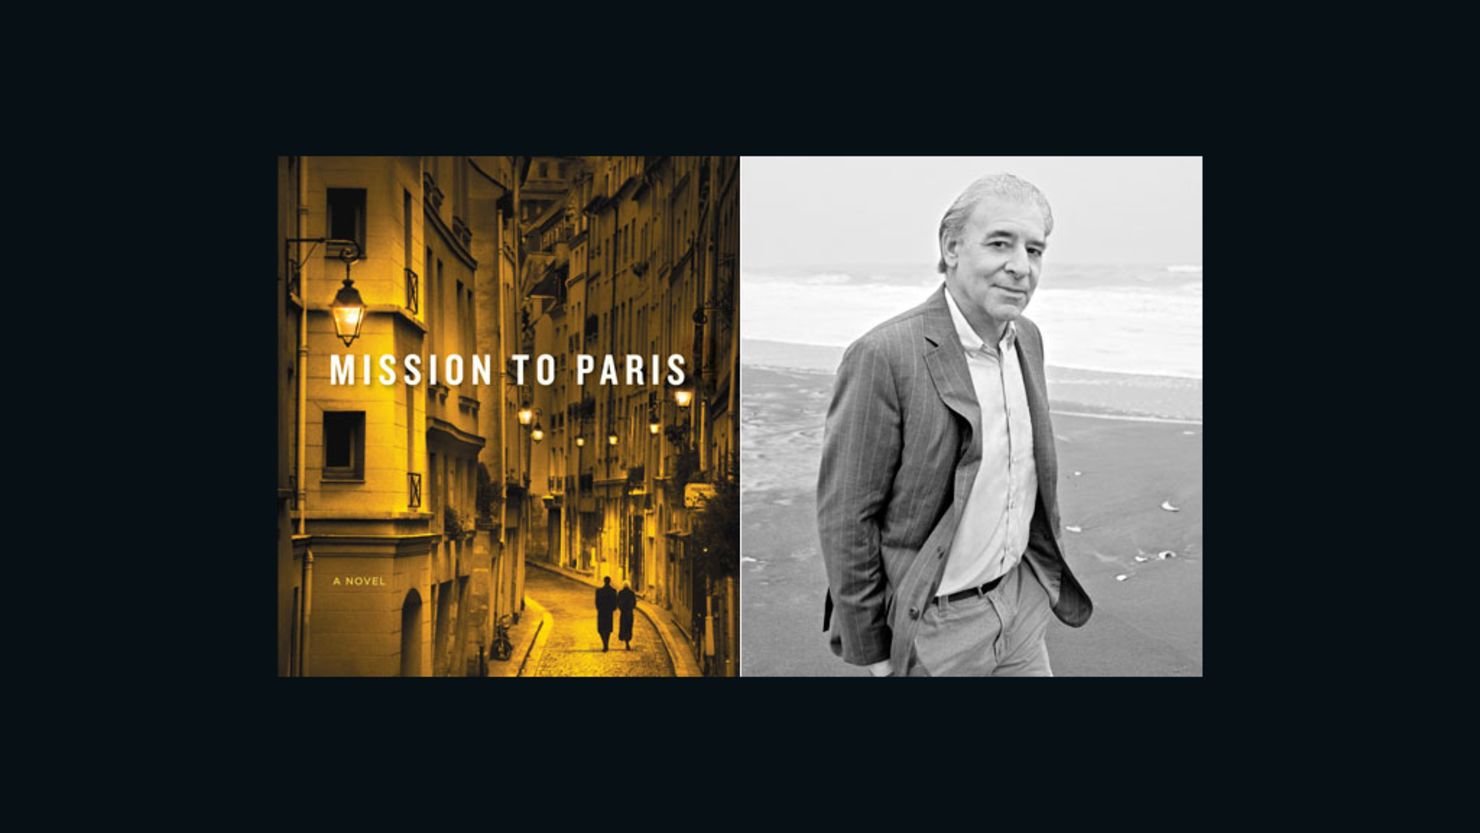 Novelist Alan Furst has a special affinity for Paris of the 1930s. "The Paris of that time period was an incredible place," he says.